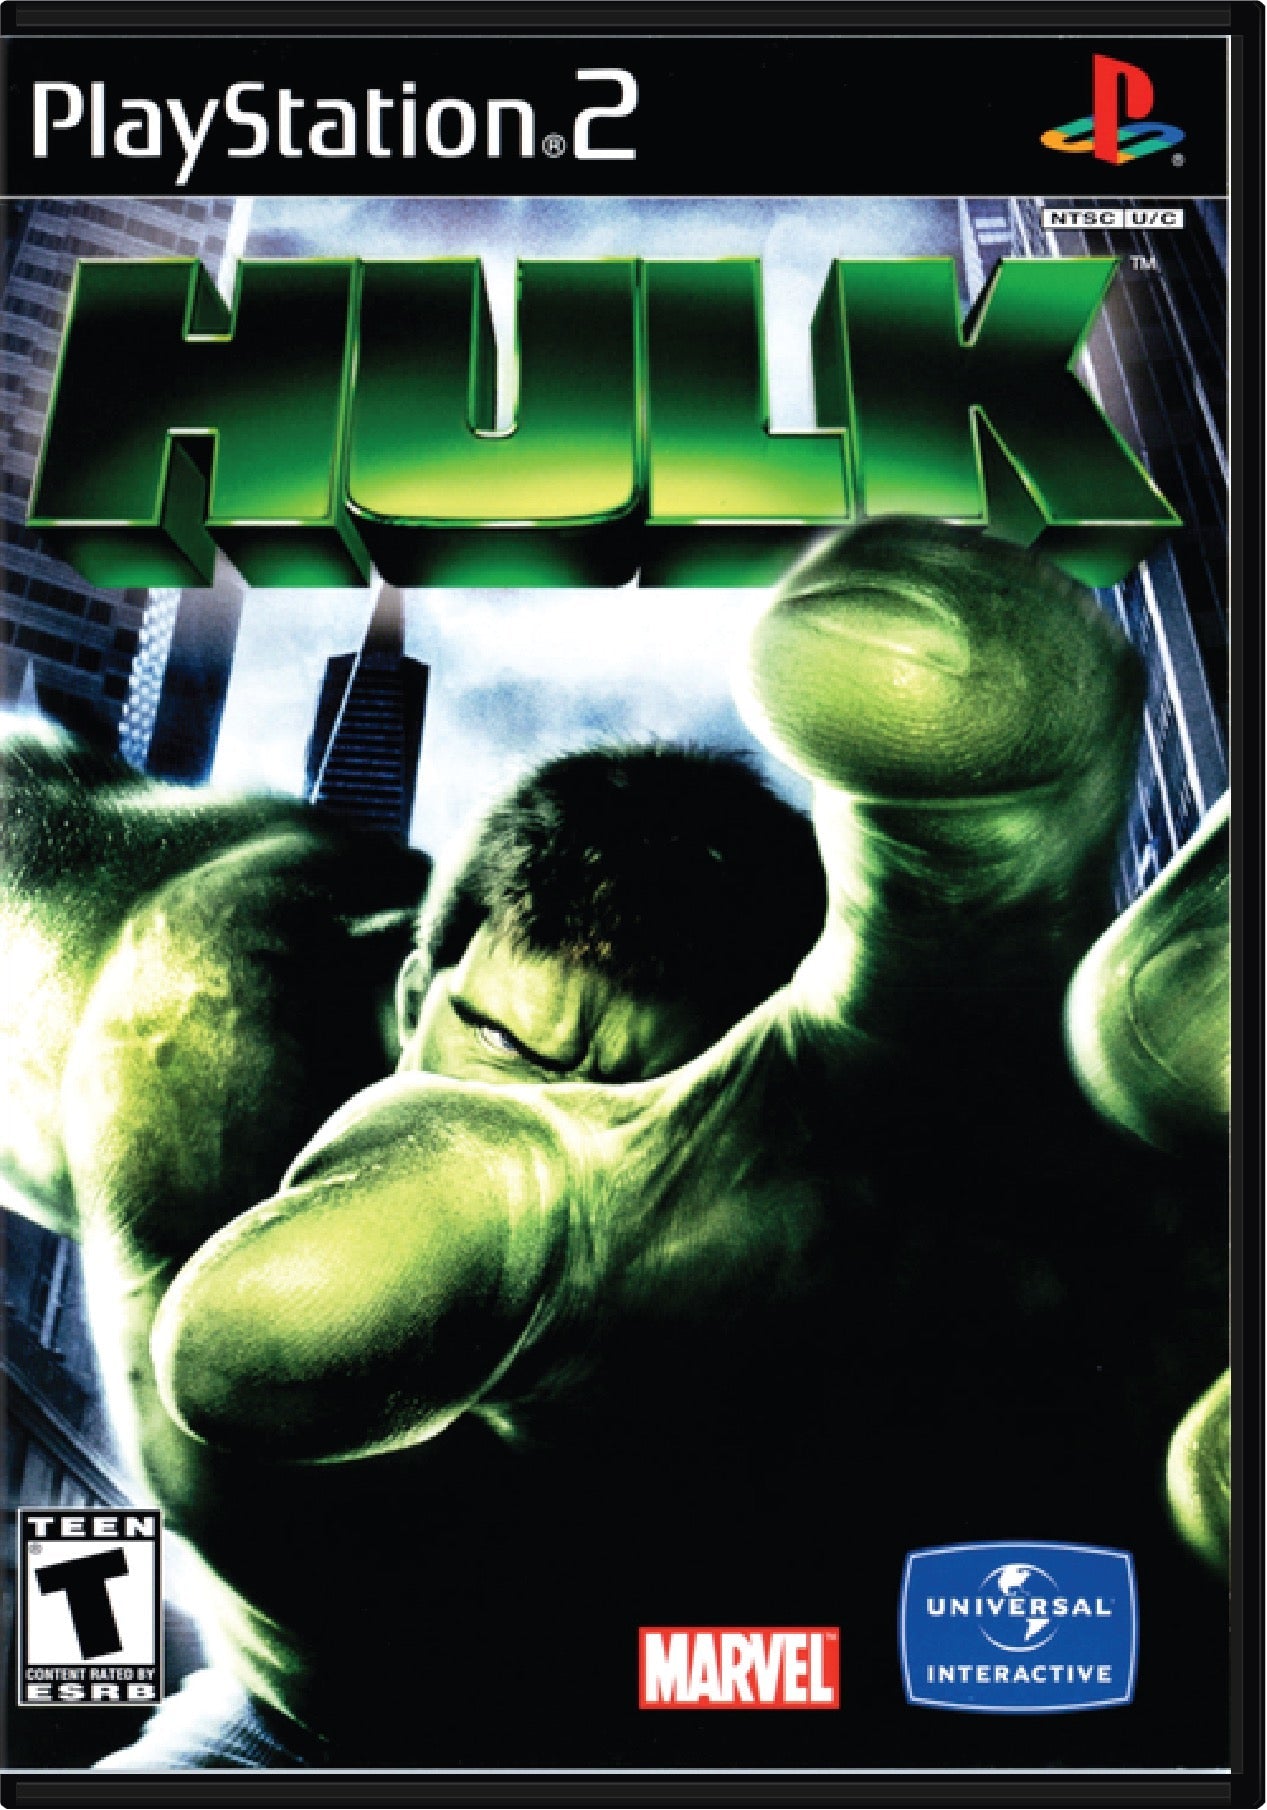 Hulk Cover Art and Product Photo